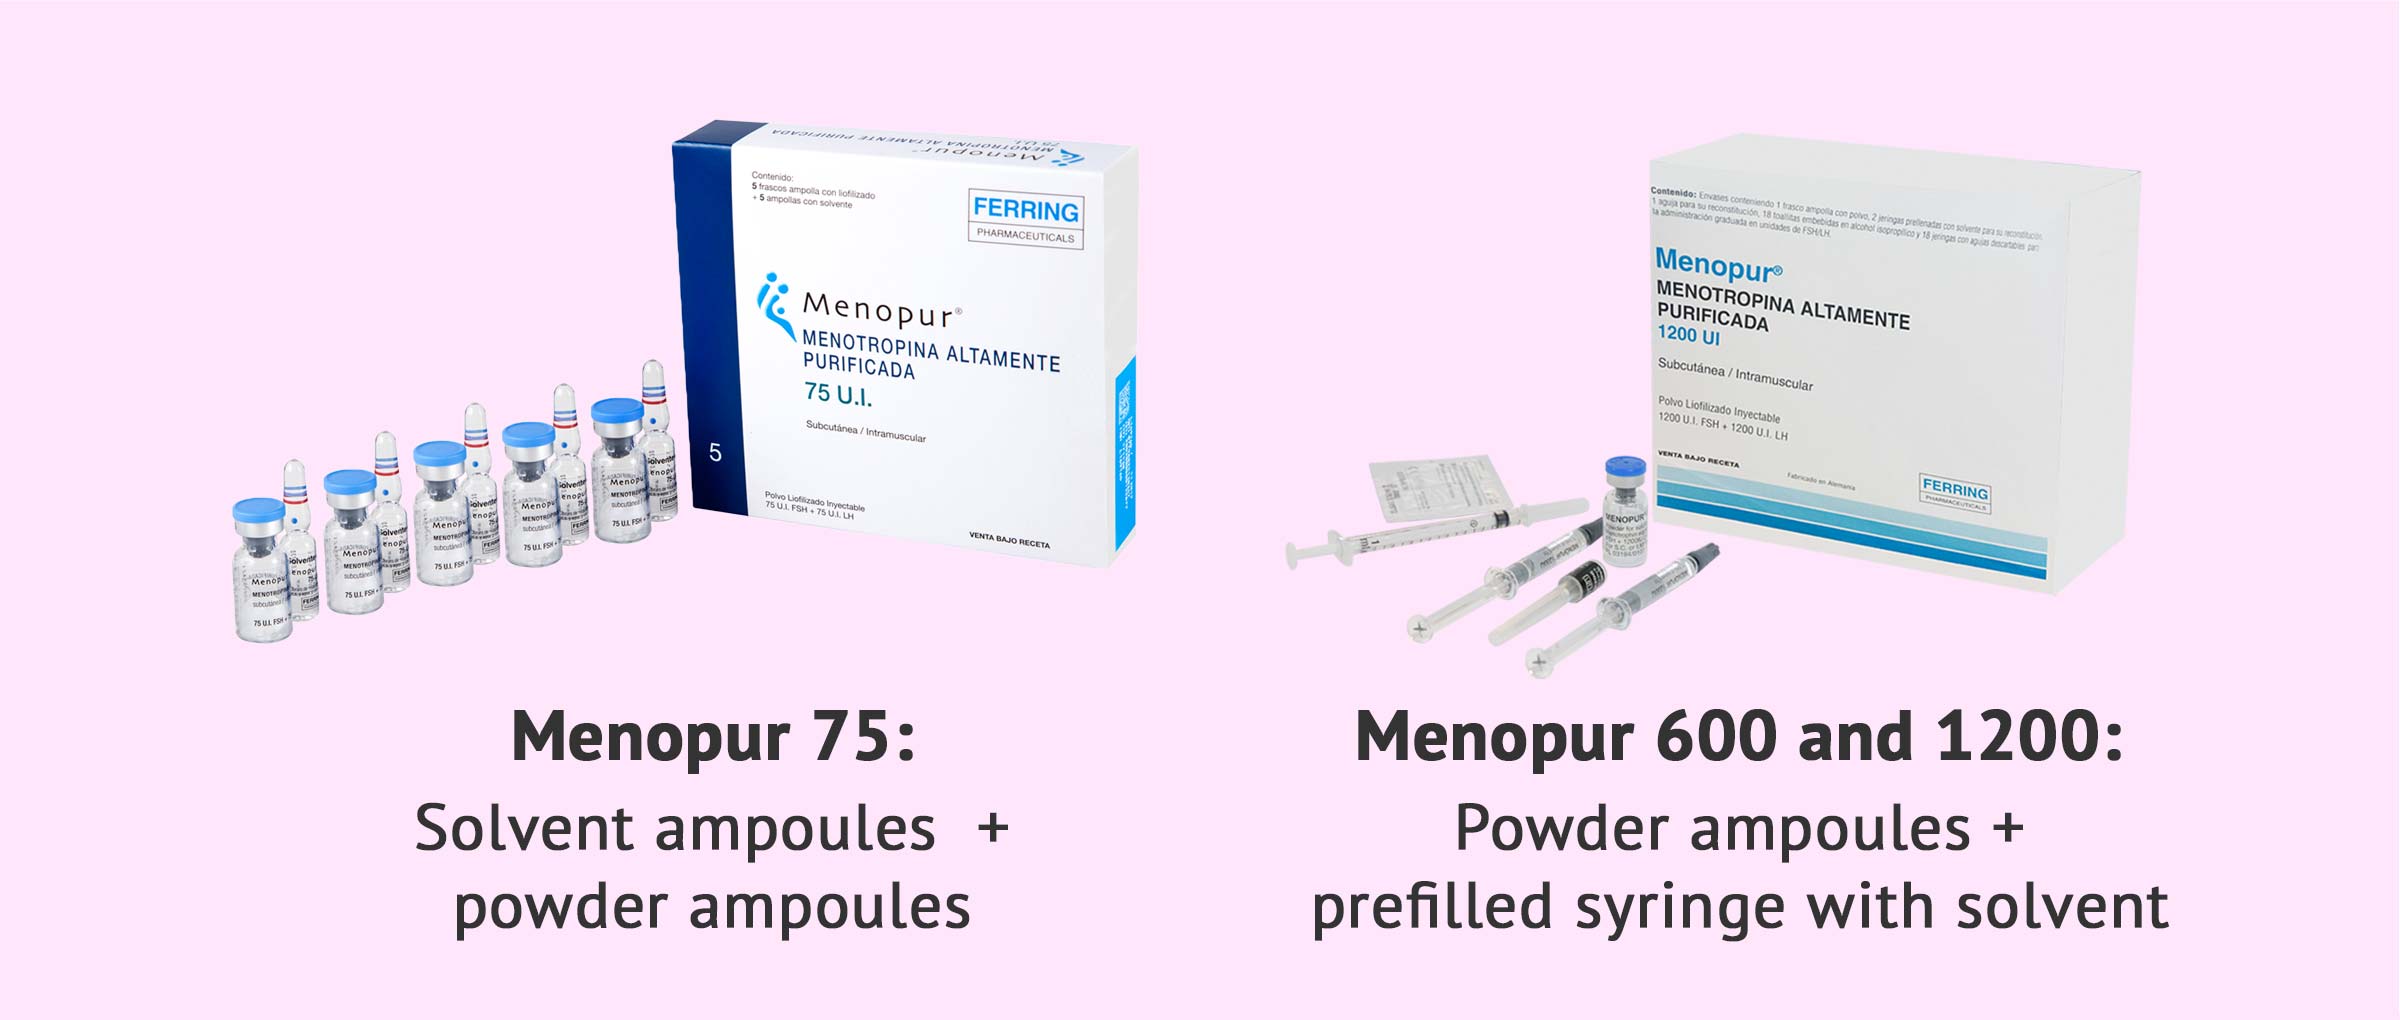 Formats and ingredients of Menopur